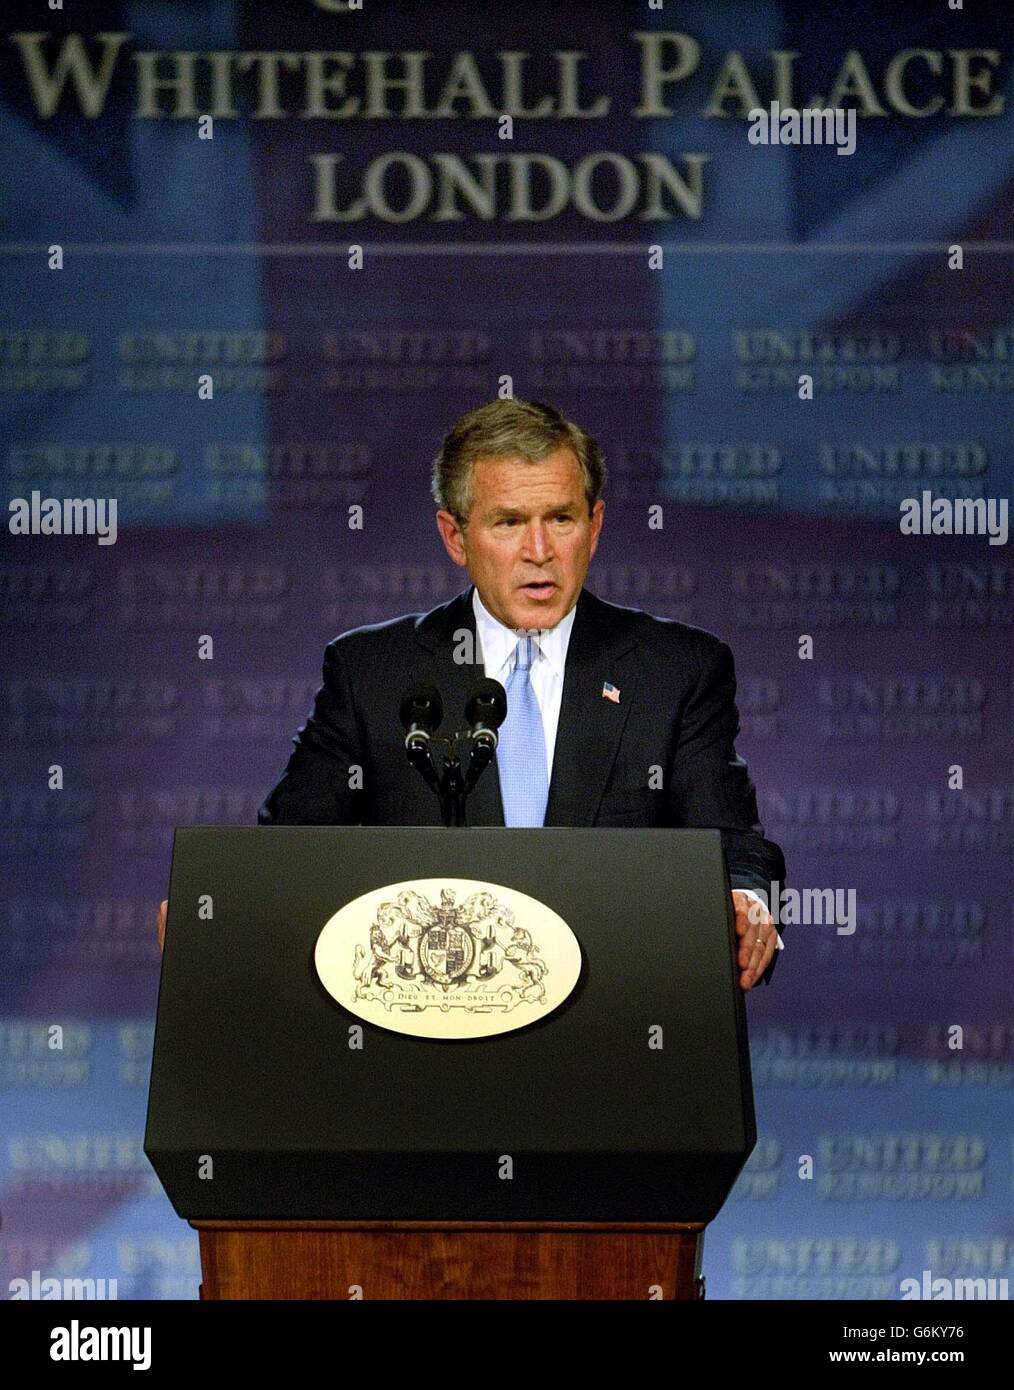 US President George Bush during his address in London's Banqueting House as he declared that the British and American peoples were united in an 'alliance of values' .Mr Bush recalled the idealism of his predecessor Woodrow Wilson, the last US President to stay at Buckingham Palace, whose appeals for global justice in the wake of the First World War led to the creation of the League of Nations. Stock Photo